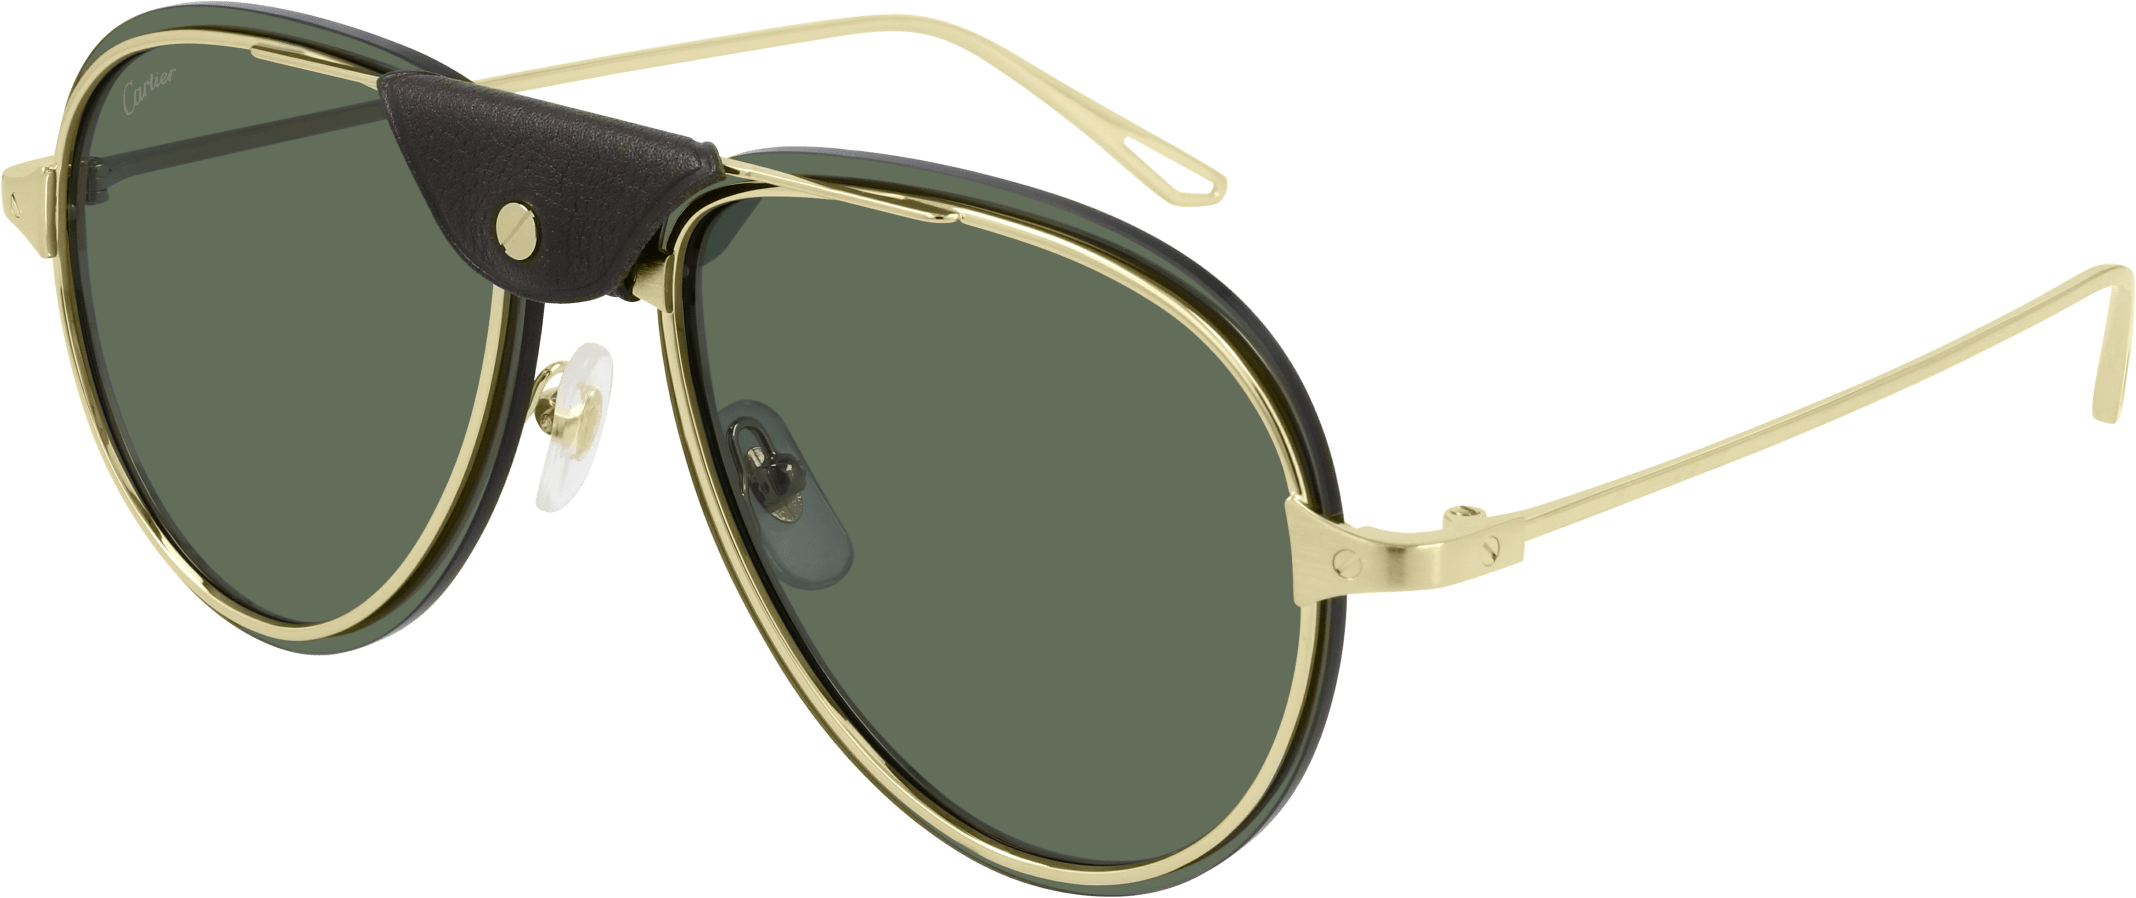 Color_CT0242S-002 - GOLD - GREEN - AR (ANTI REFLECTIVE) - POLARIZED